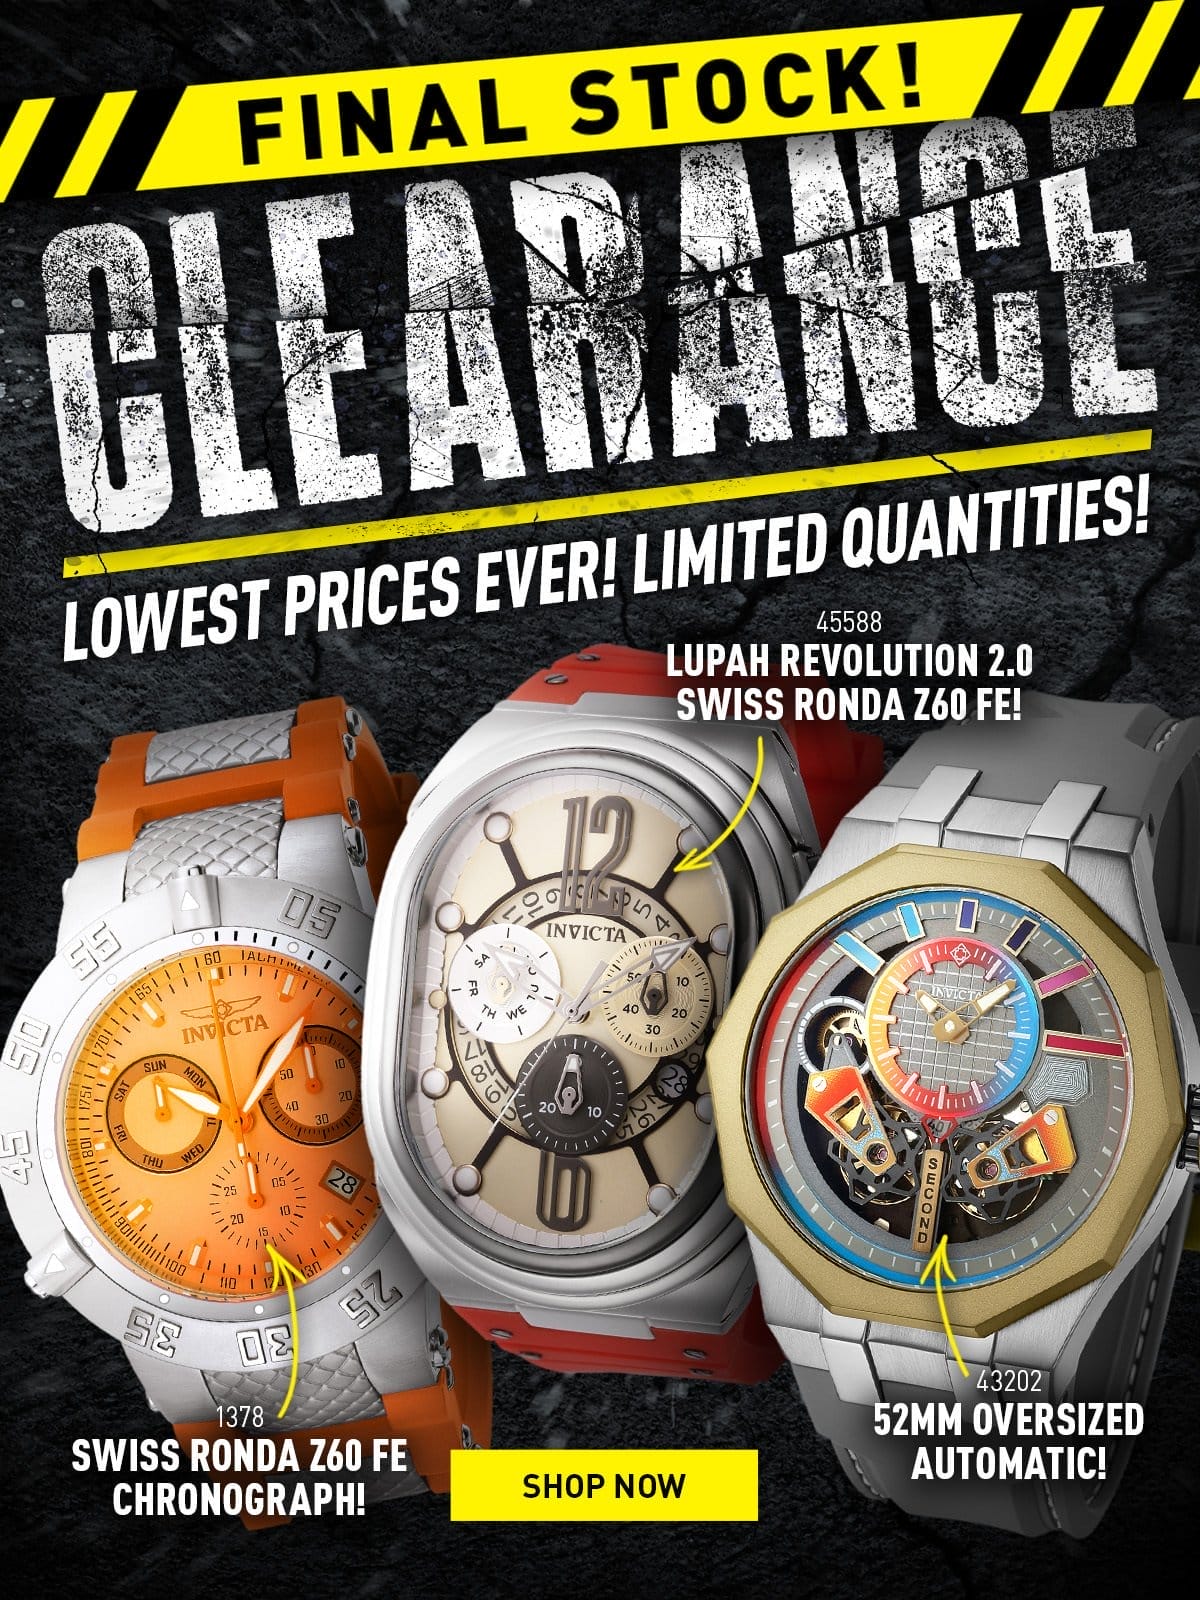 Clearance - Lowest prices ever! Limited quantities!